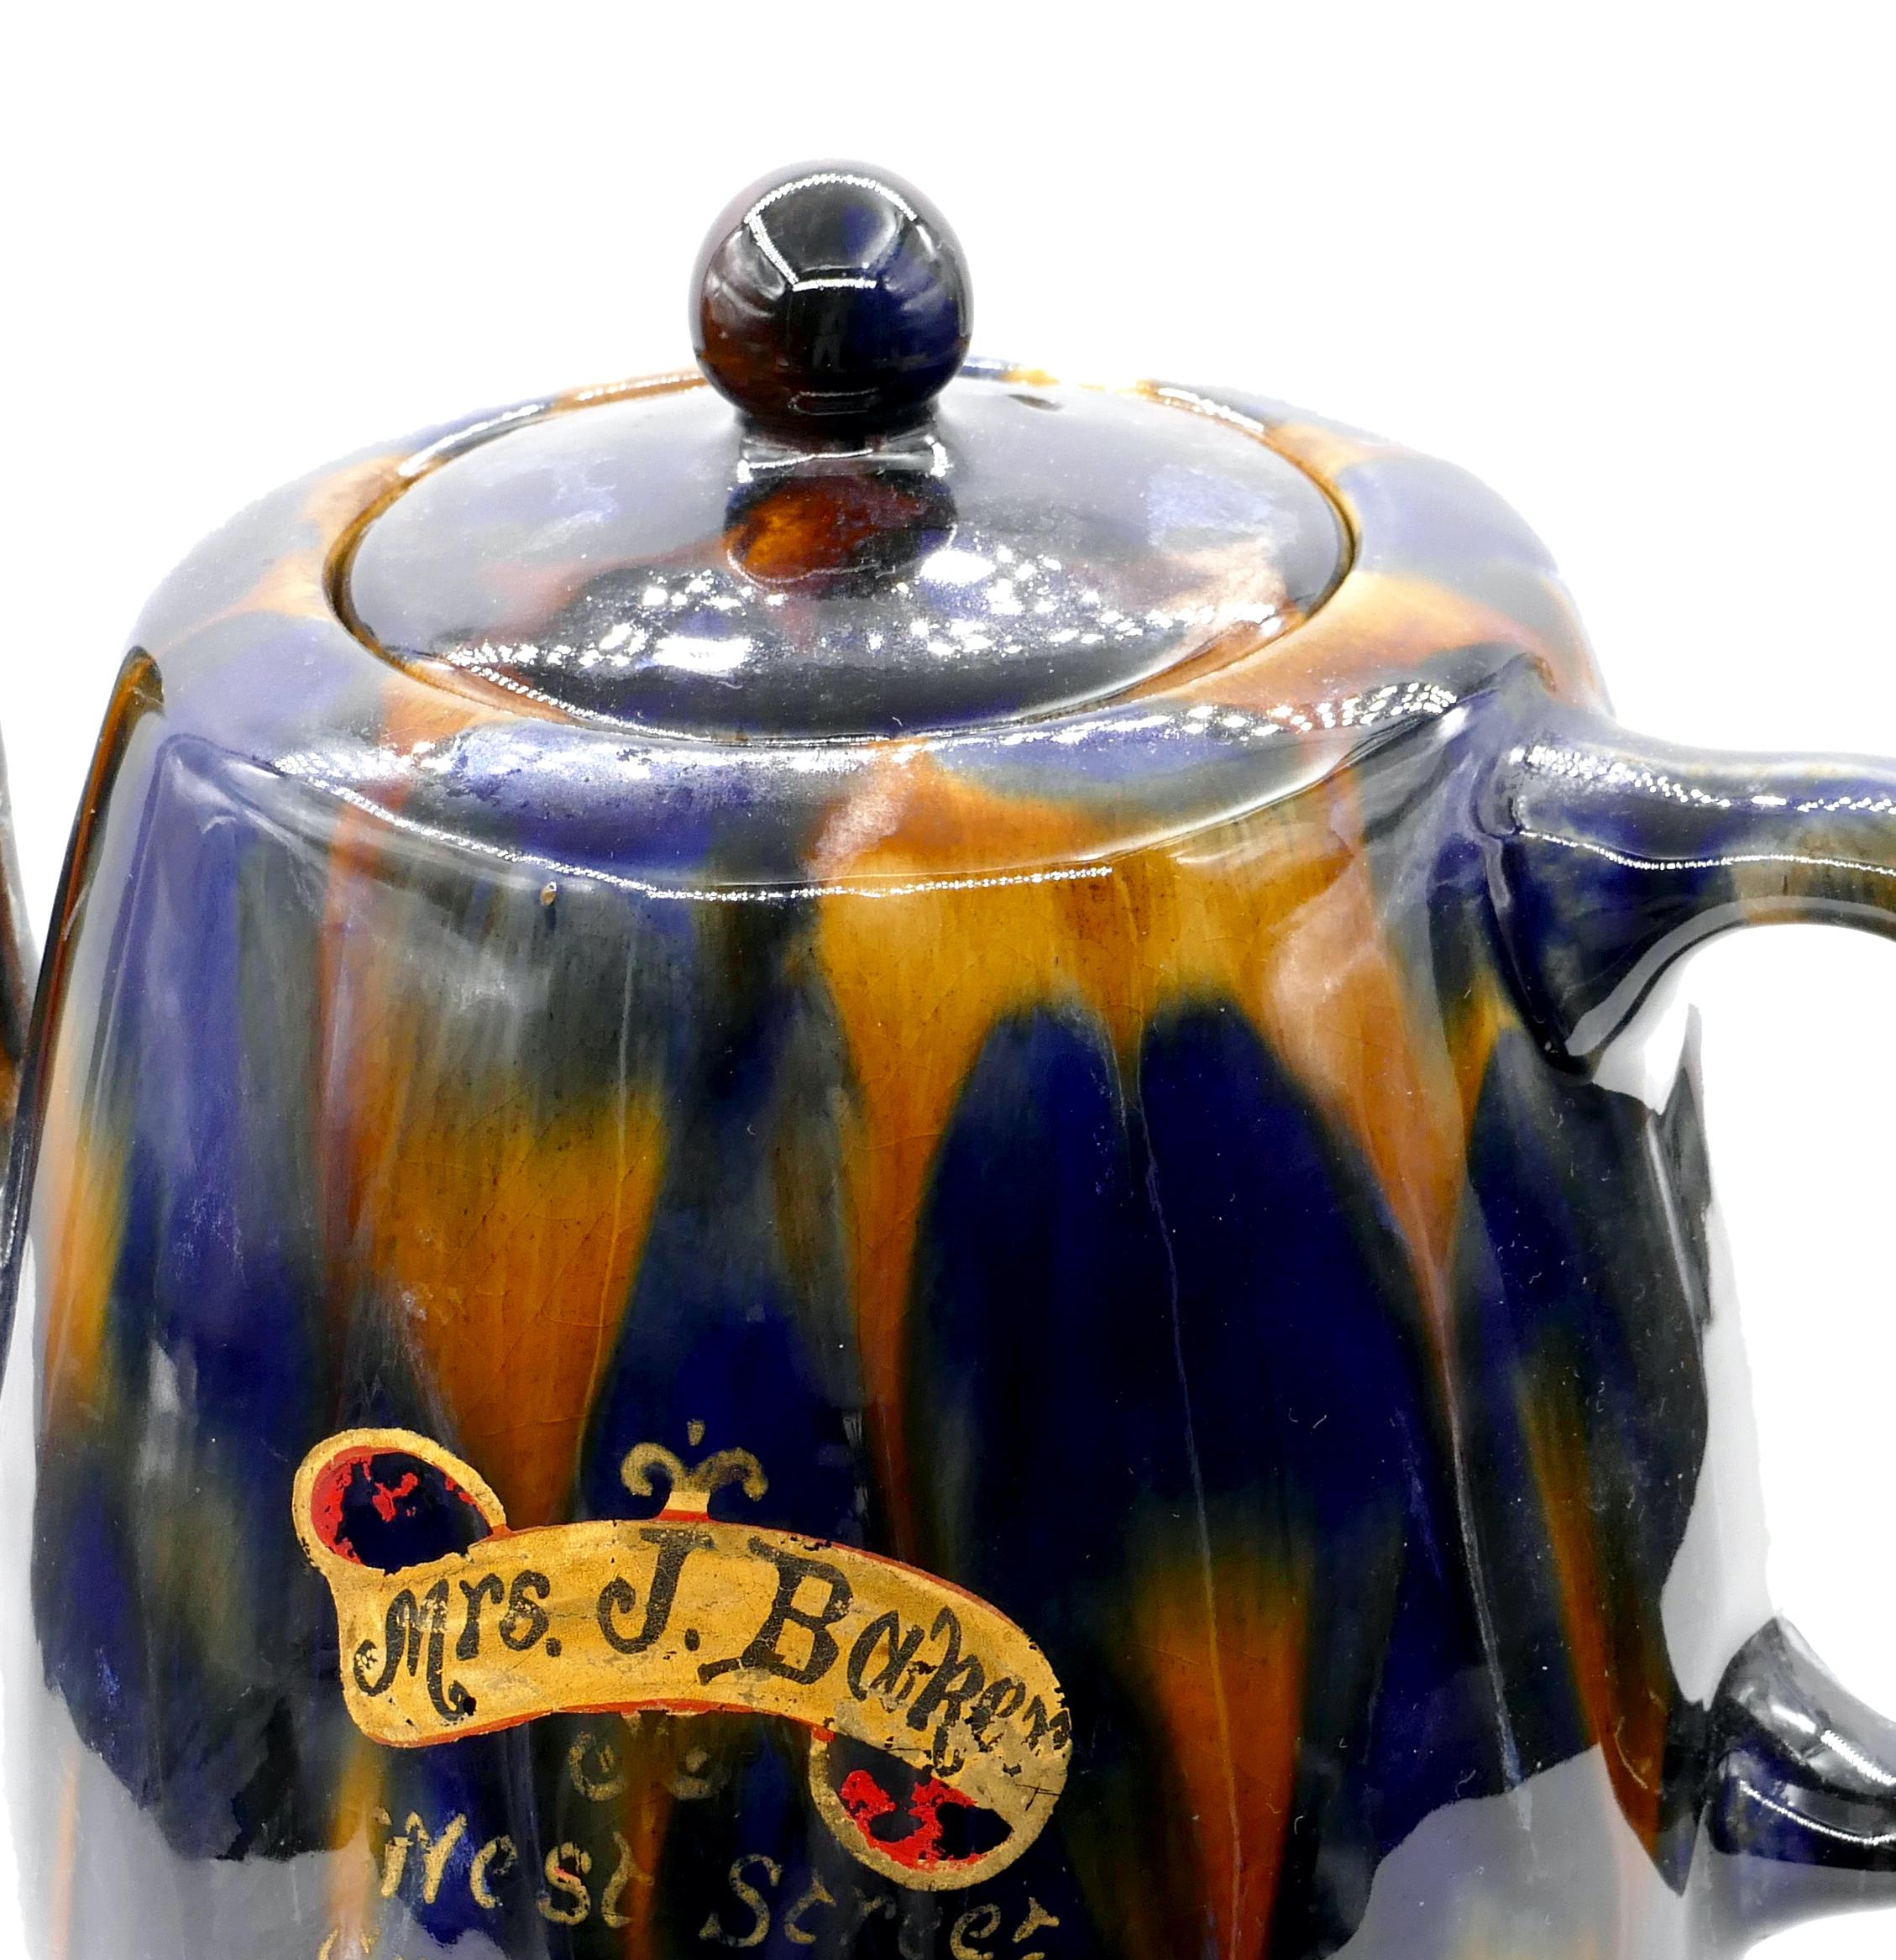 Colored teapot is an original decorative object realized in the mid of the 20th century by Denby Pottery.

Original glazed ceramics. 

